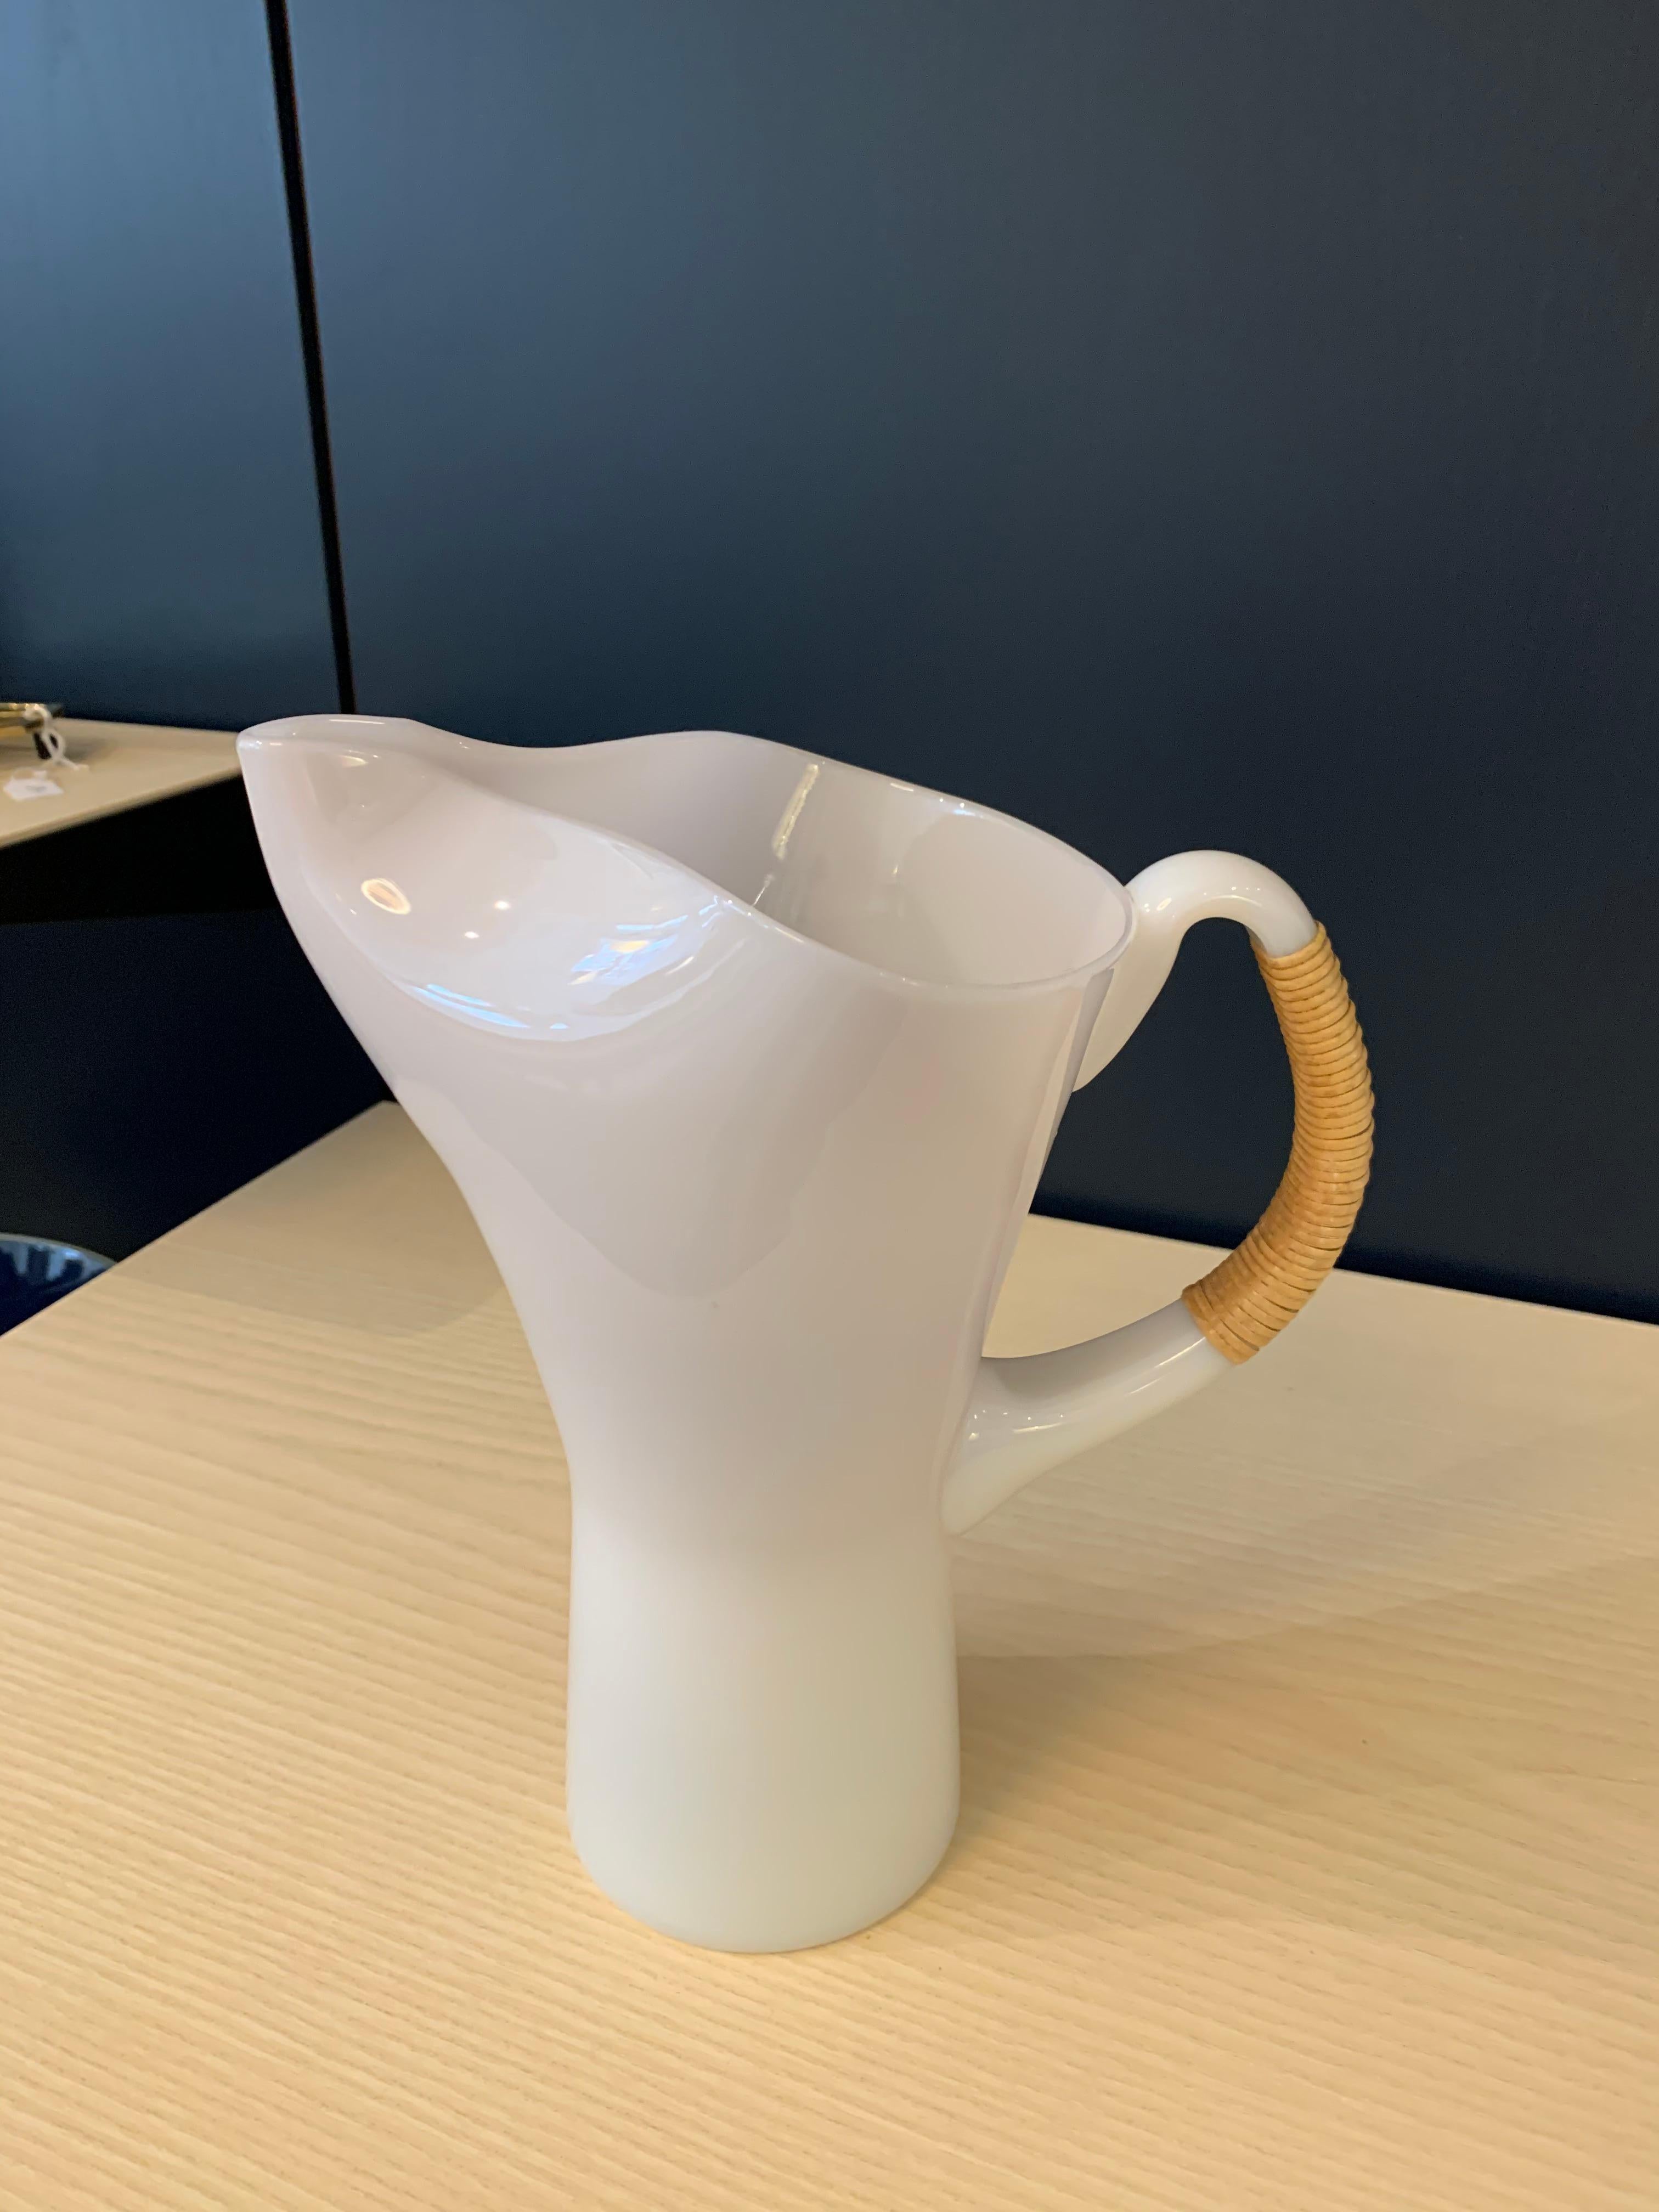 Opaline and cane Pitcher, designed in 1957 by Danish designer Jacob Eiler Bang for Kastrup Glasværk Denmark. The pitcher is part of a series of opaline glass utensils object series that was in production until 1965. 

Jacob E. Bang designed